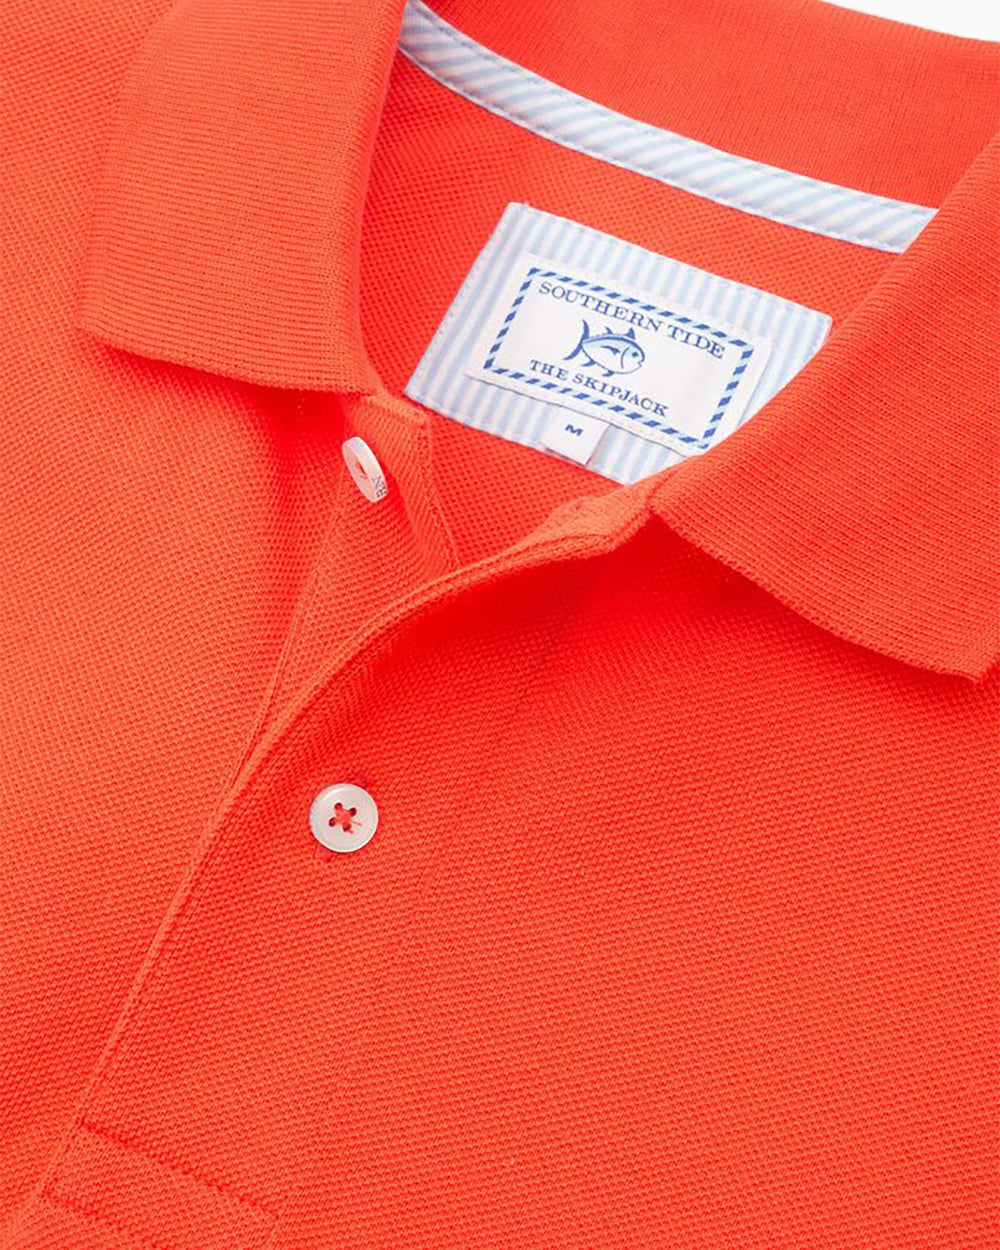 The detail of the Men's Orange Clemson Tigers Pique Polo Shirt by Southern Tide - Endzone Orange